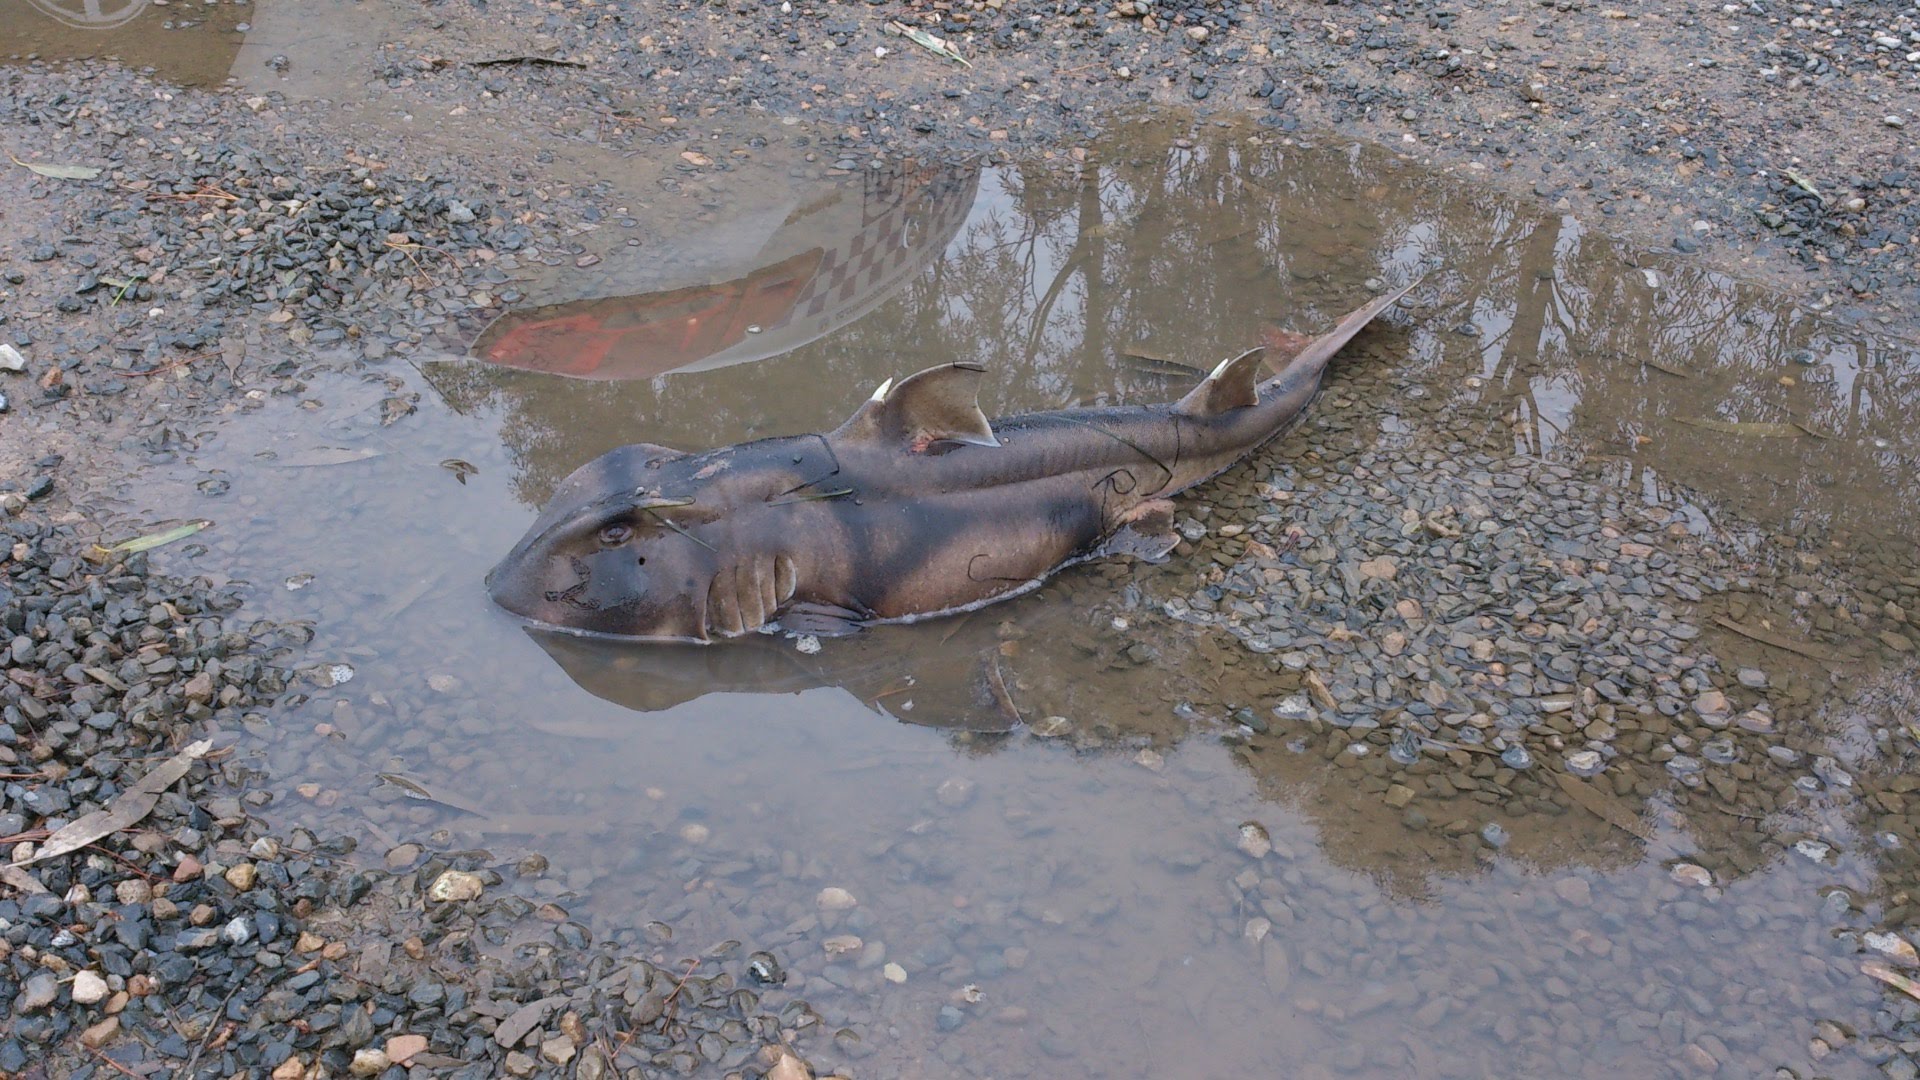 Mystery Surrounds Shark Found In Street Puddle In Australia - YouTube